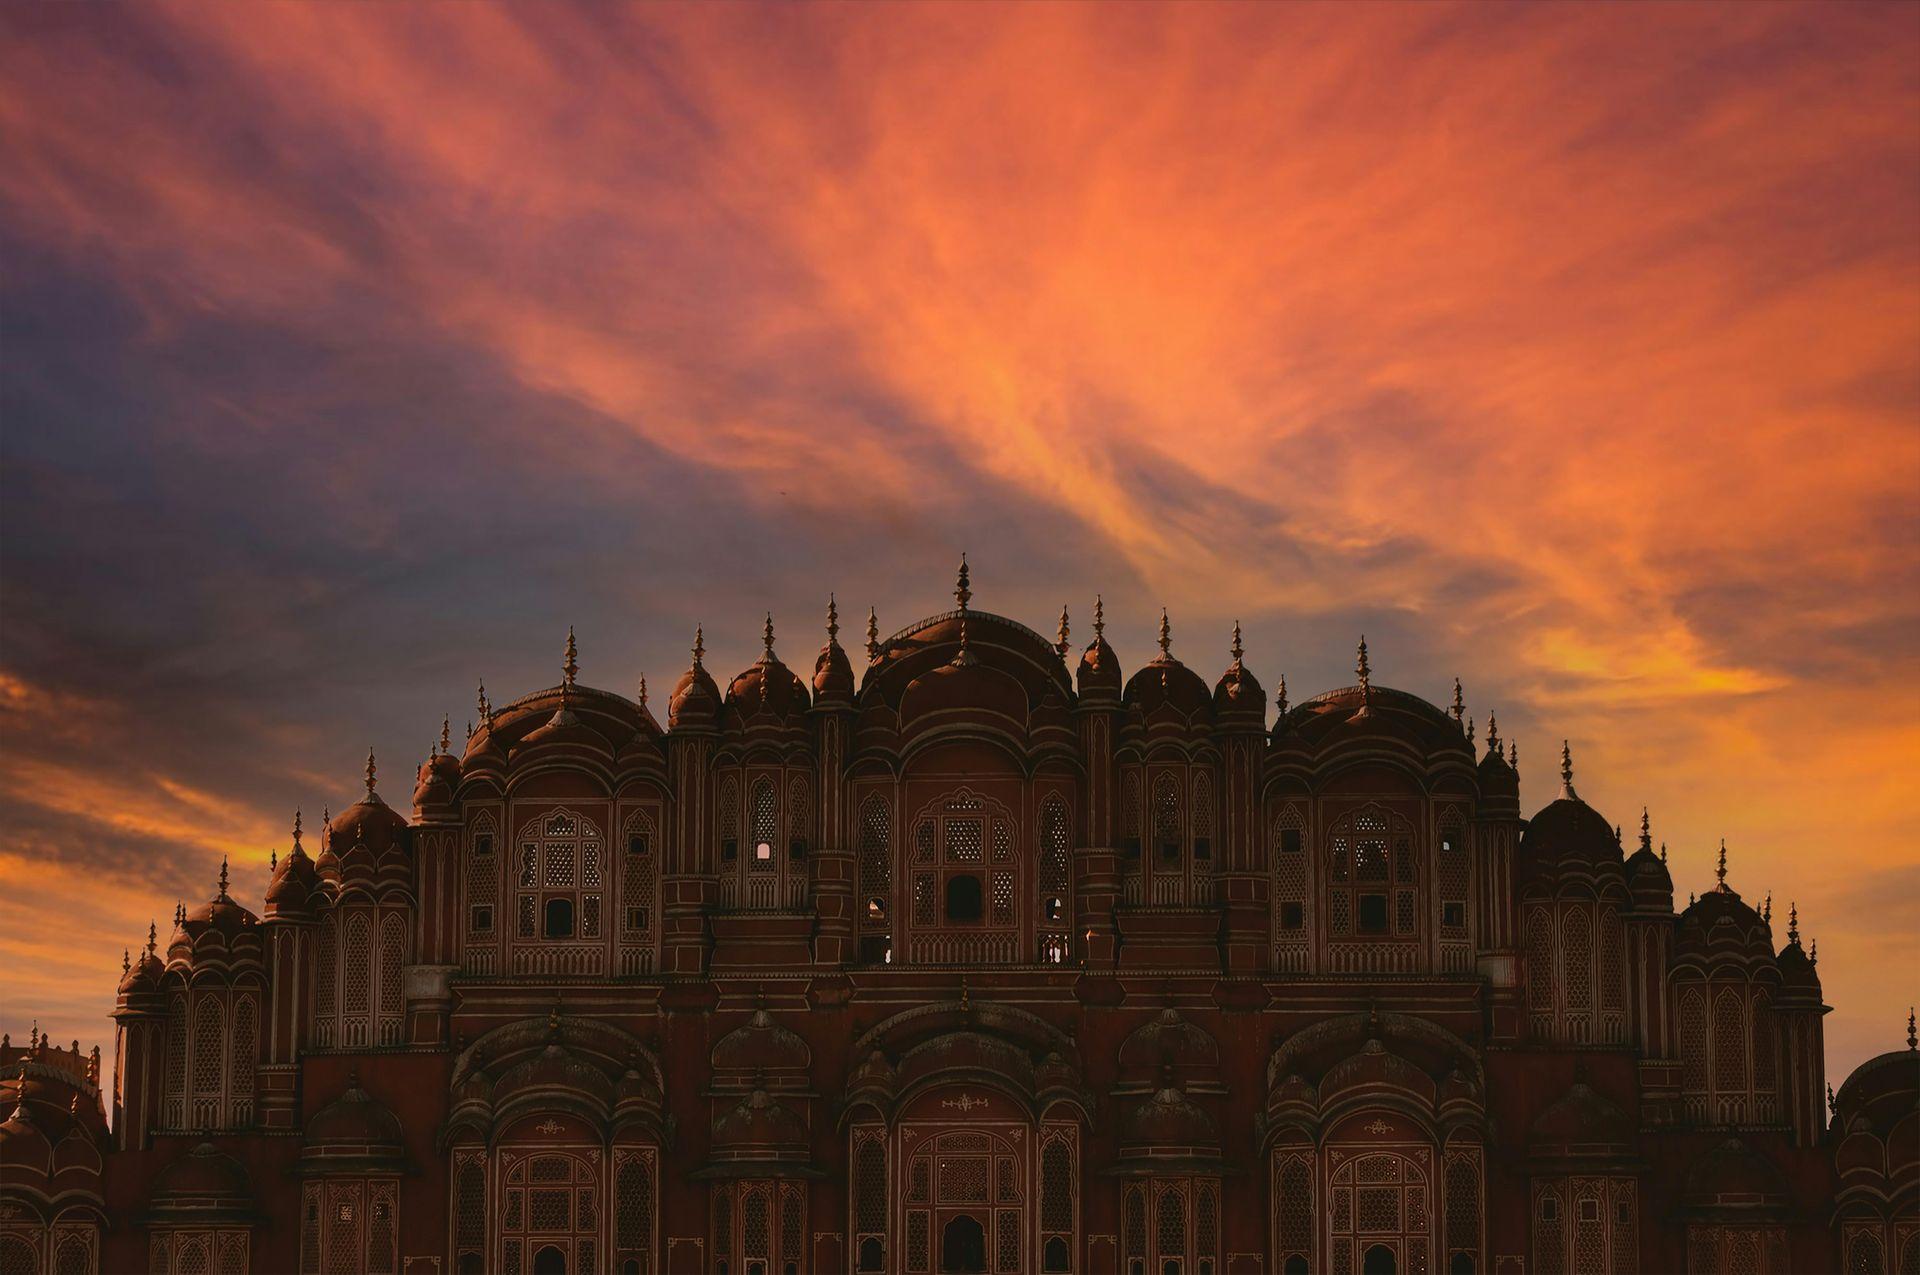 Rajasthan Heritage Expedition: A 9-Day Journey through Royal Splendor